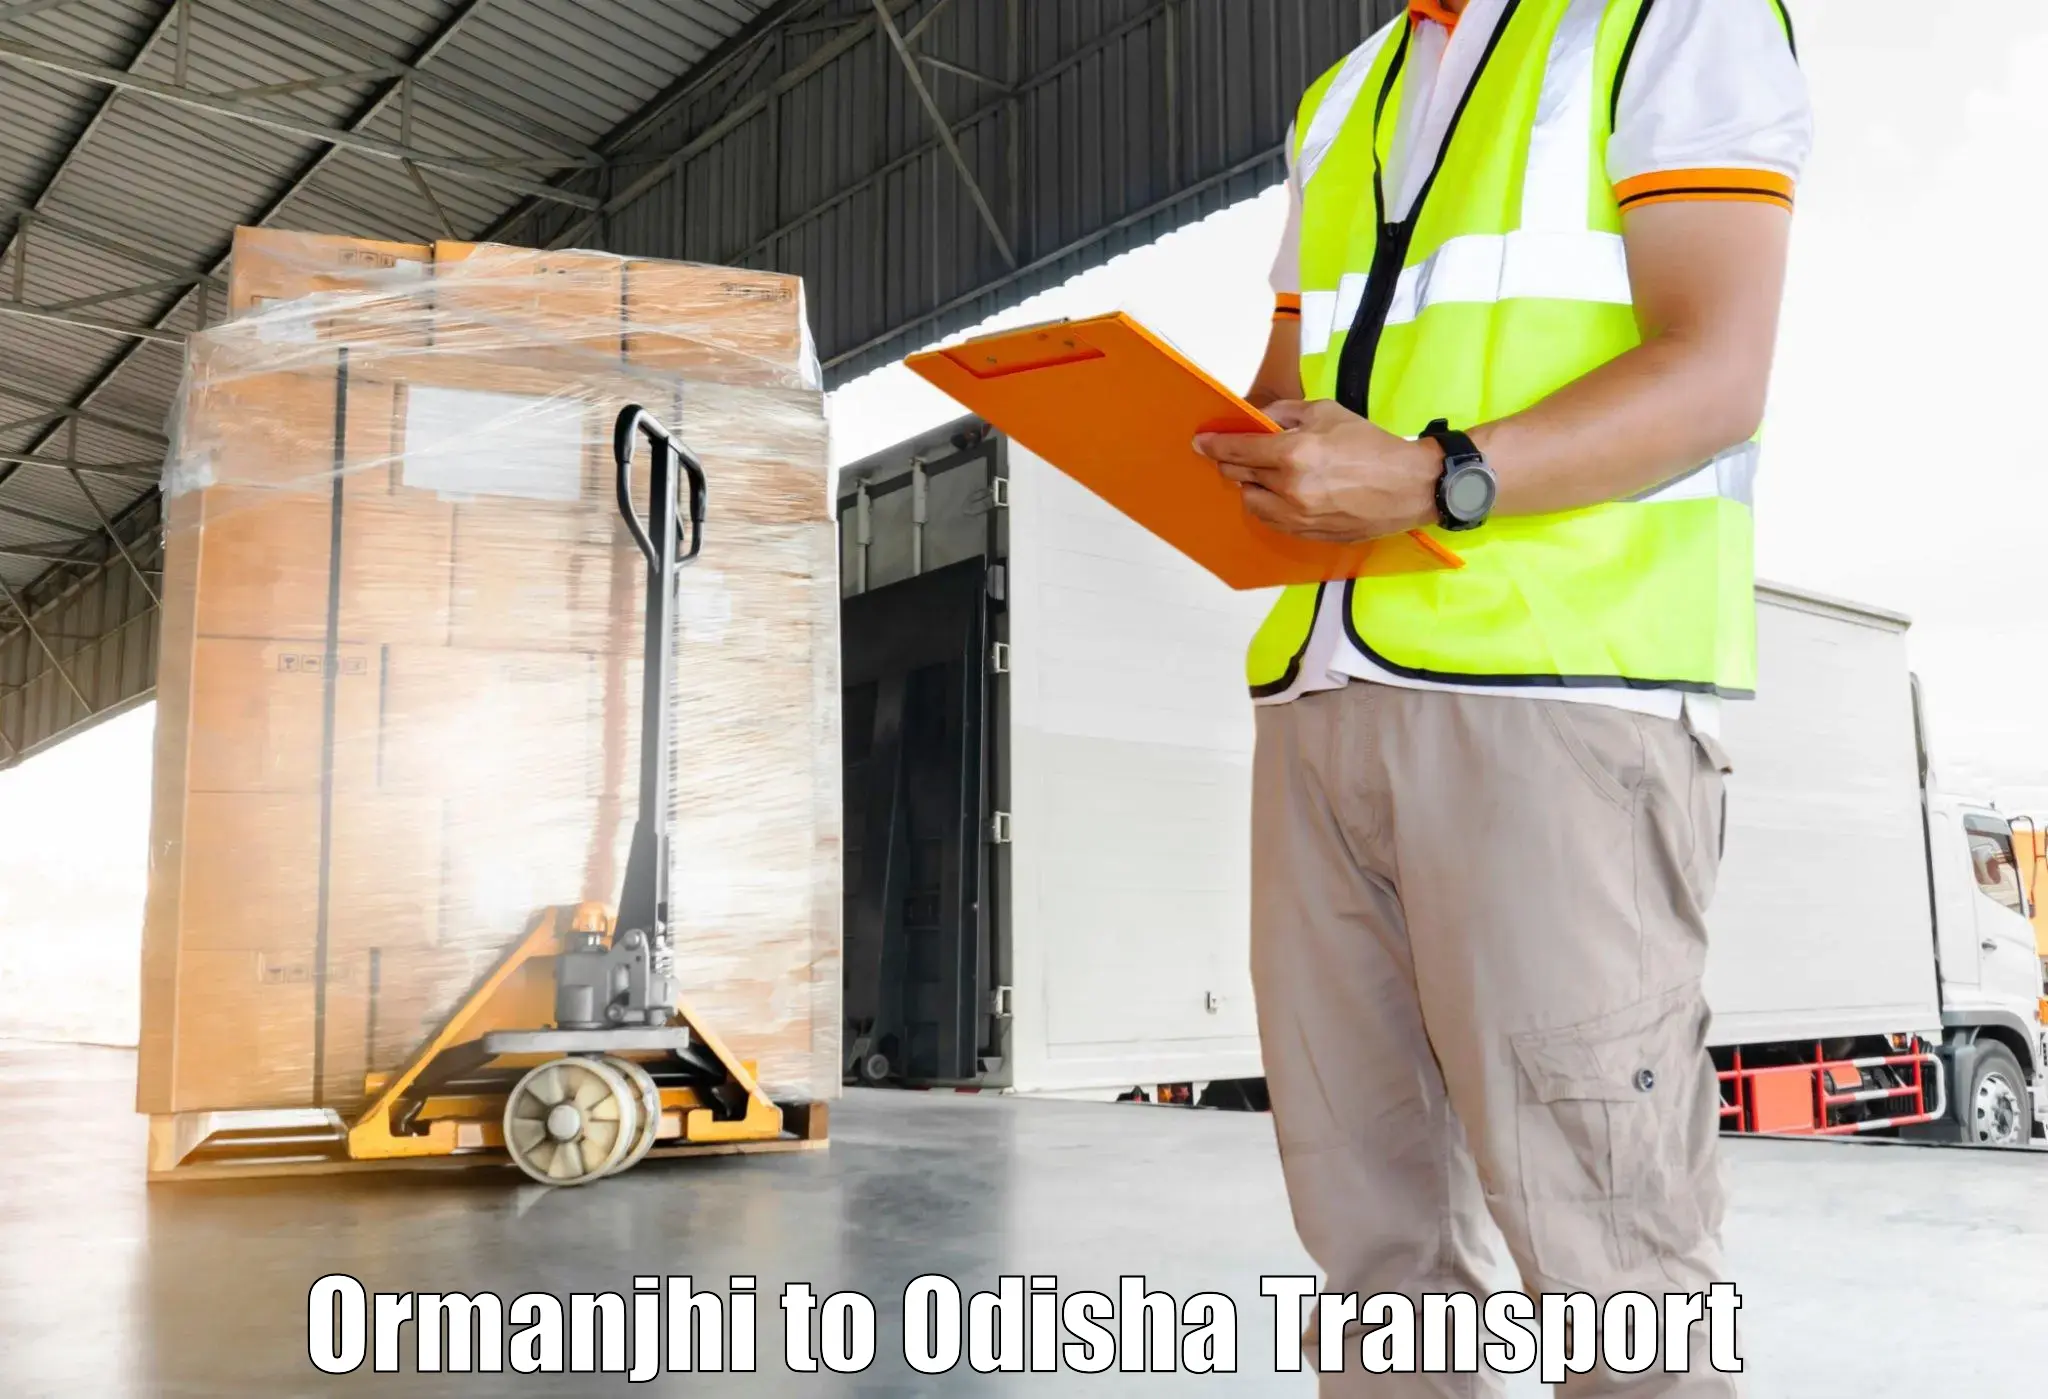 Domestic goods transportation services in Ormanjhi to Dandisahi